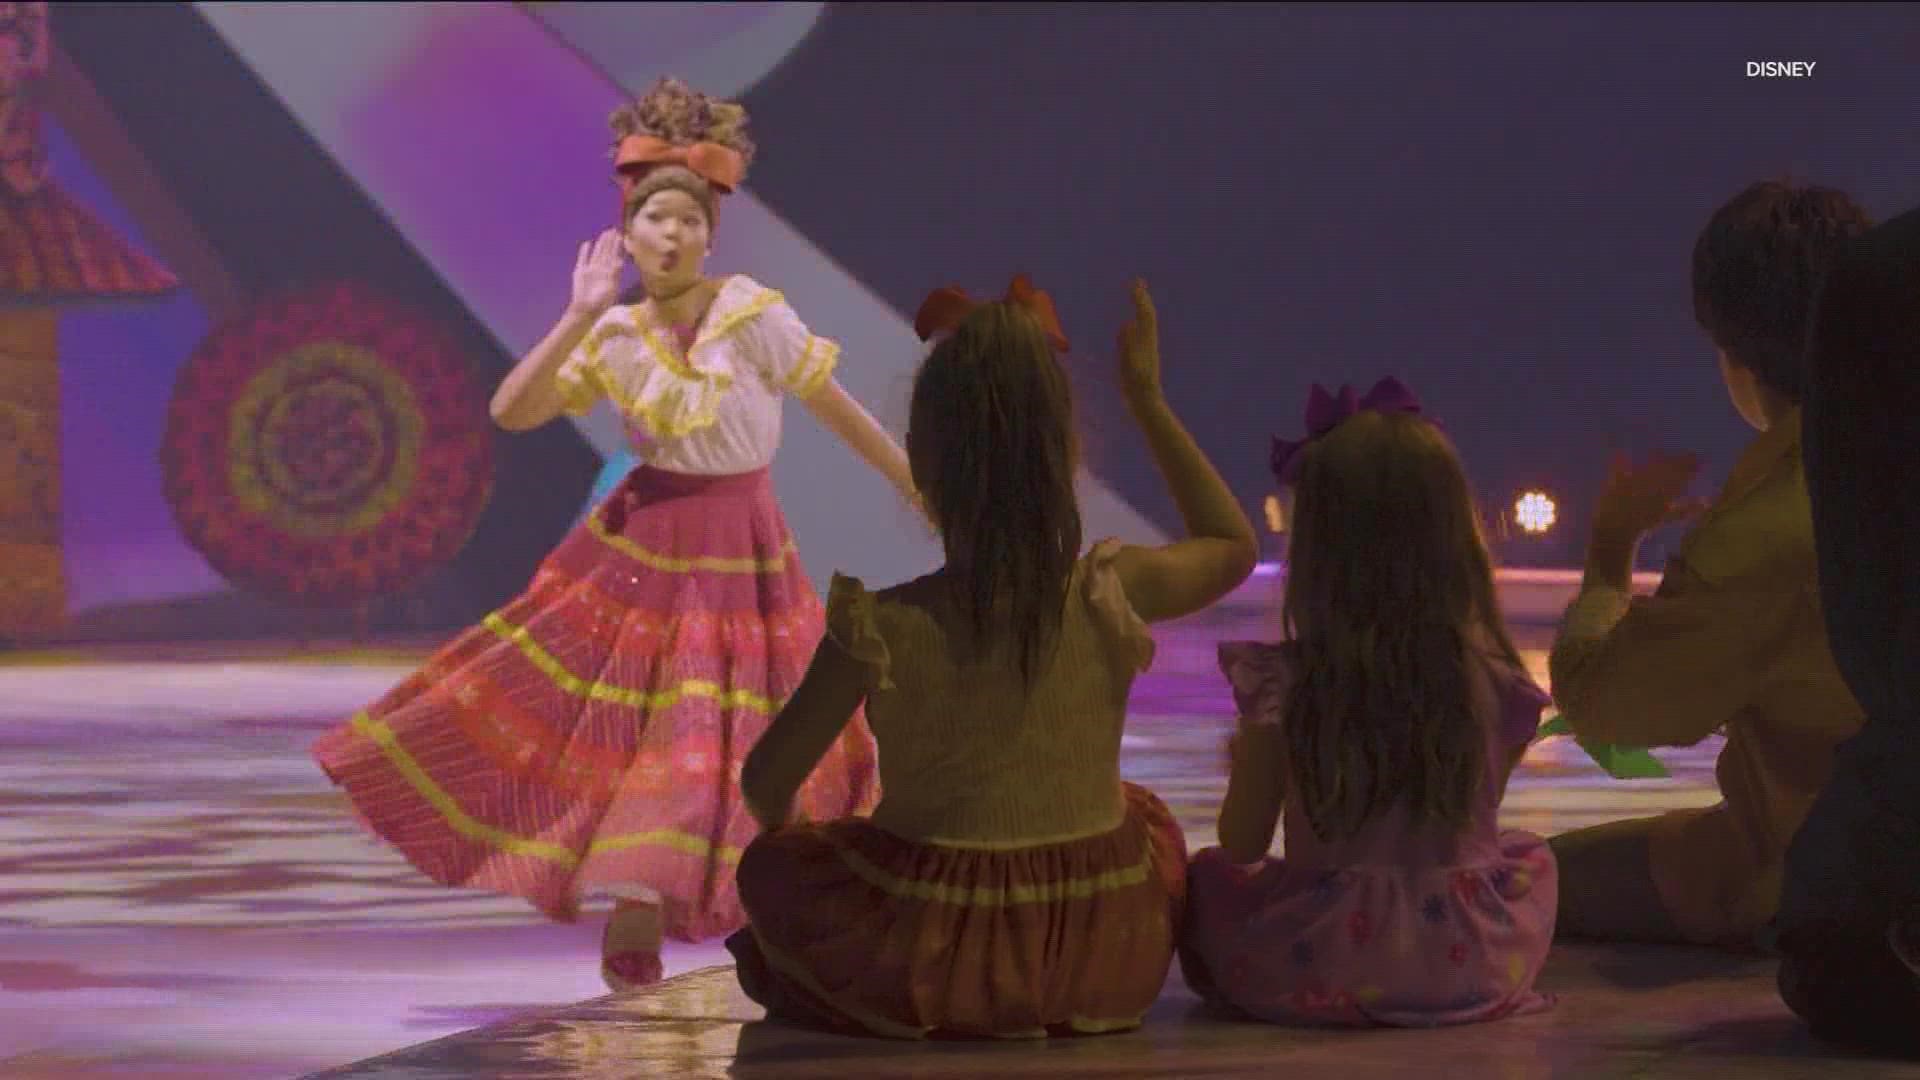 Disney On Ice is bringing the show to the Austin area for a short time.